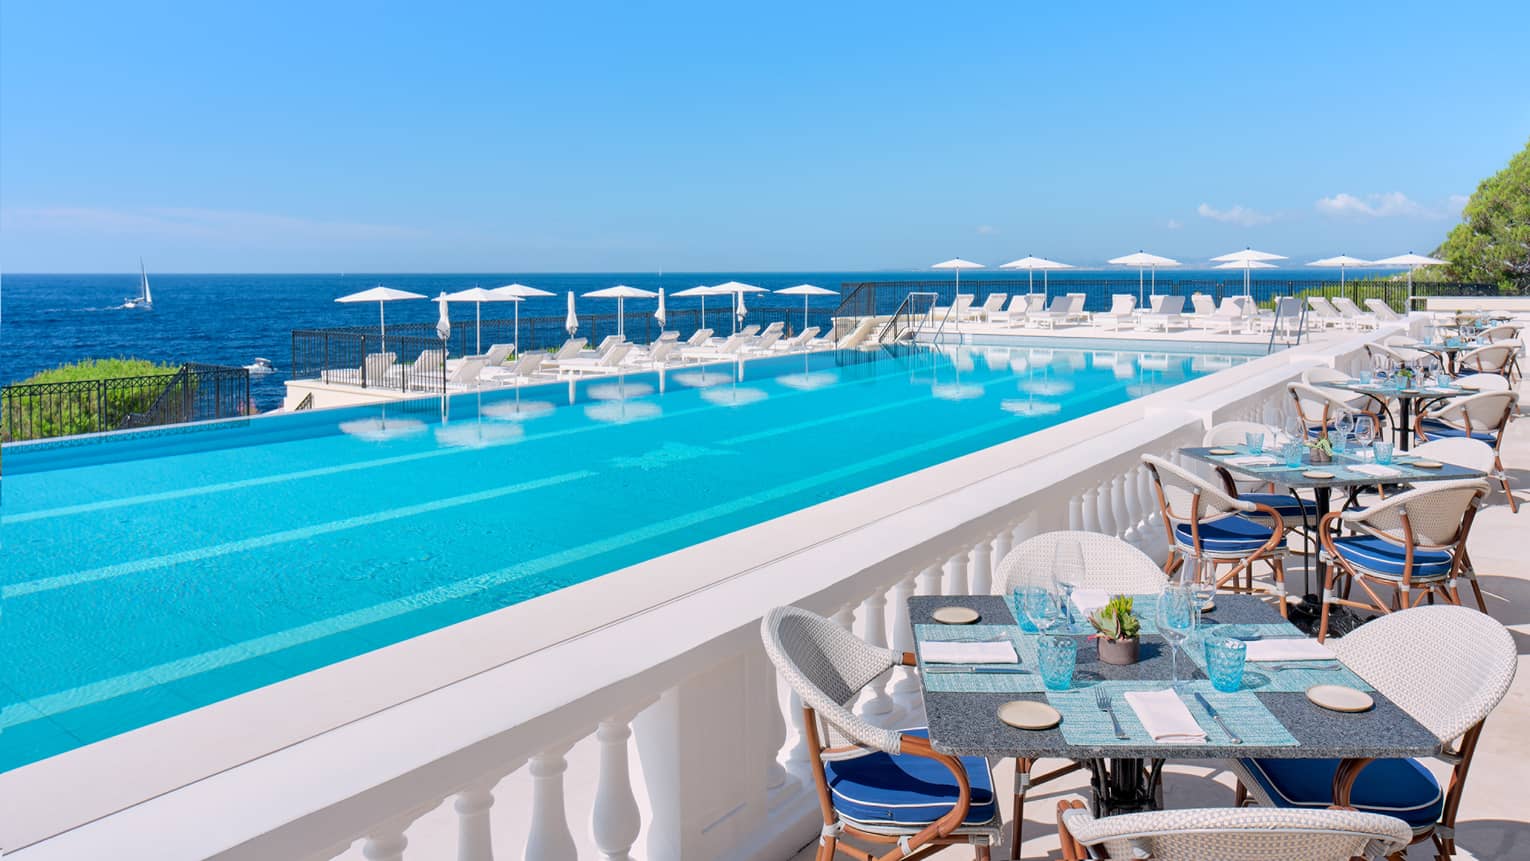 Mediterranean seafront infinity pool surrounded by white tables, lounge chairs, and umbrellas